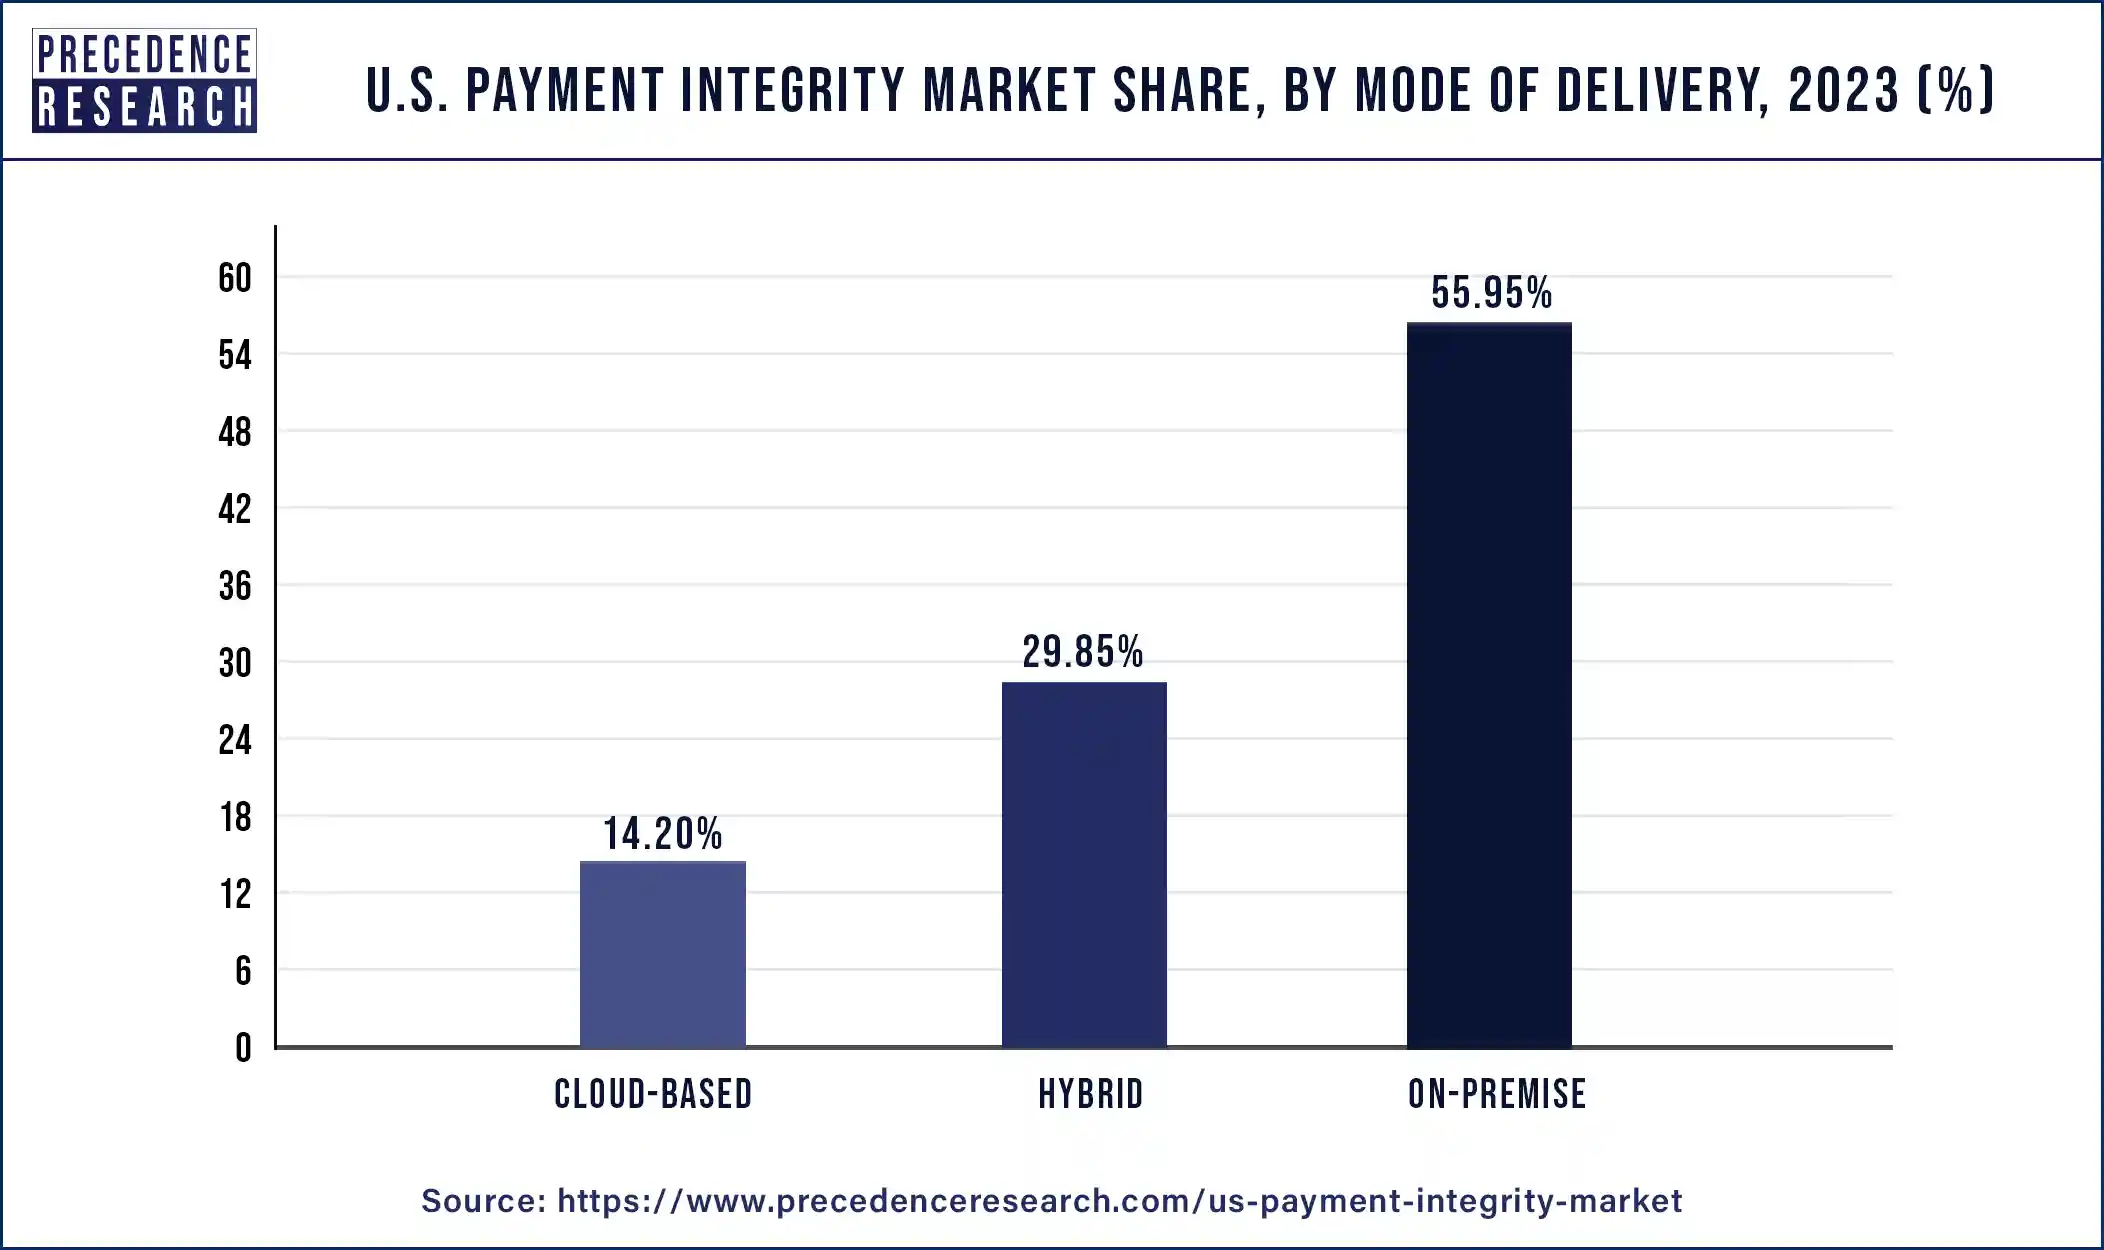 U.S. Payment Integrity Market Share, By Mode of Delivery, 2023 (%)